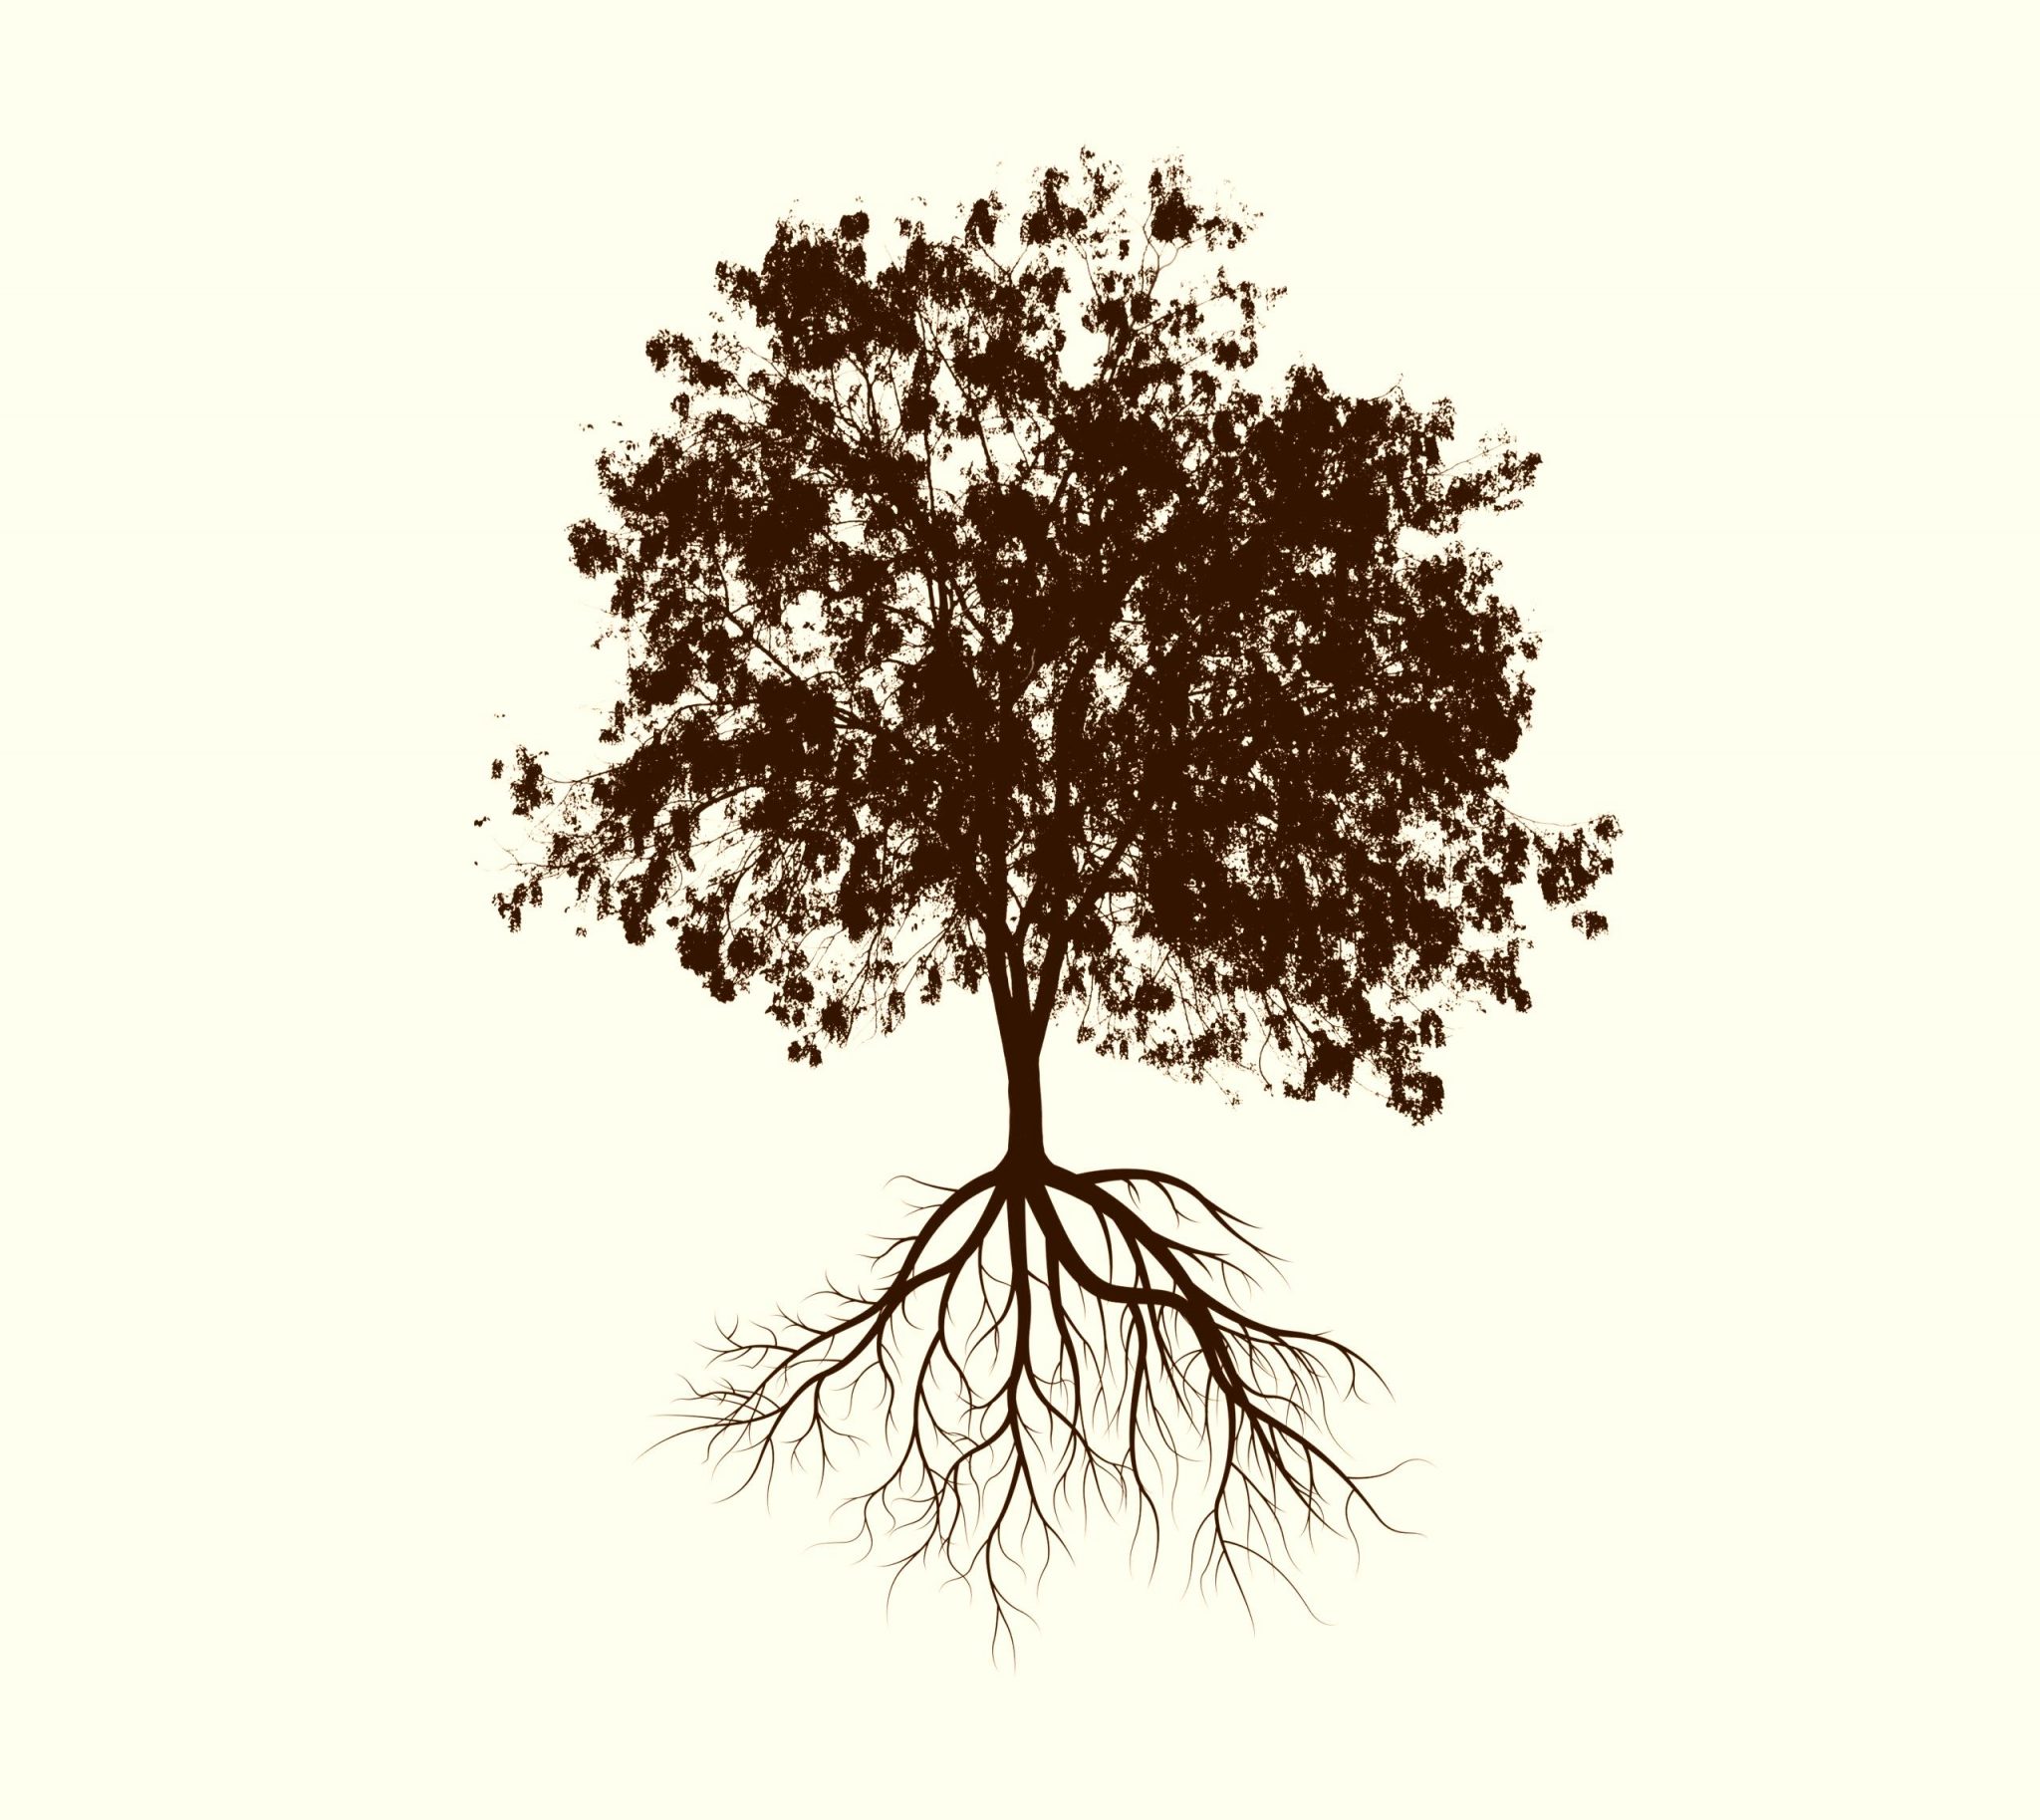 tree silhouette with roots on cream colored background